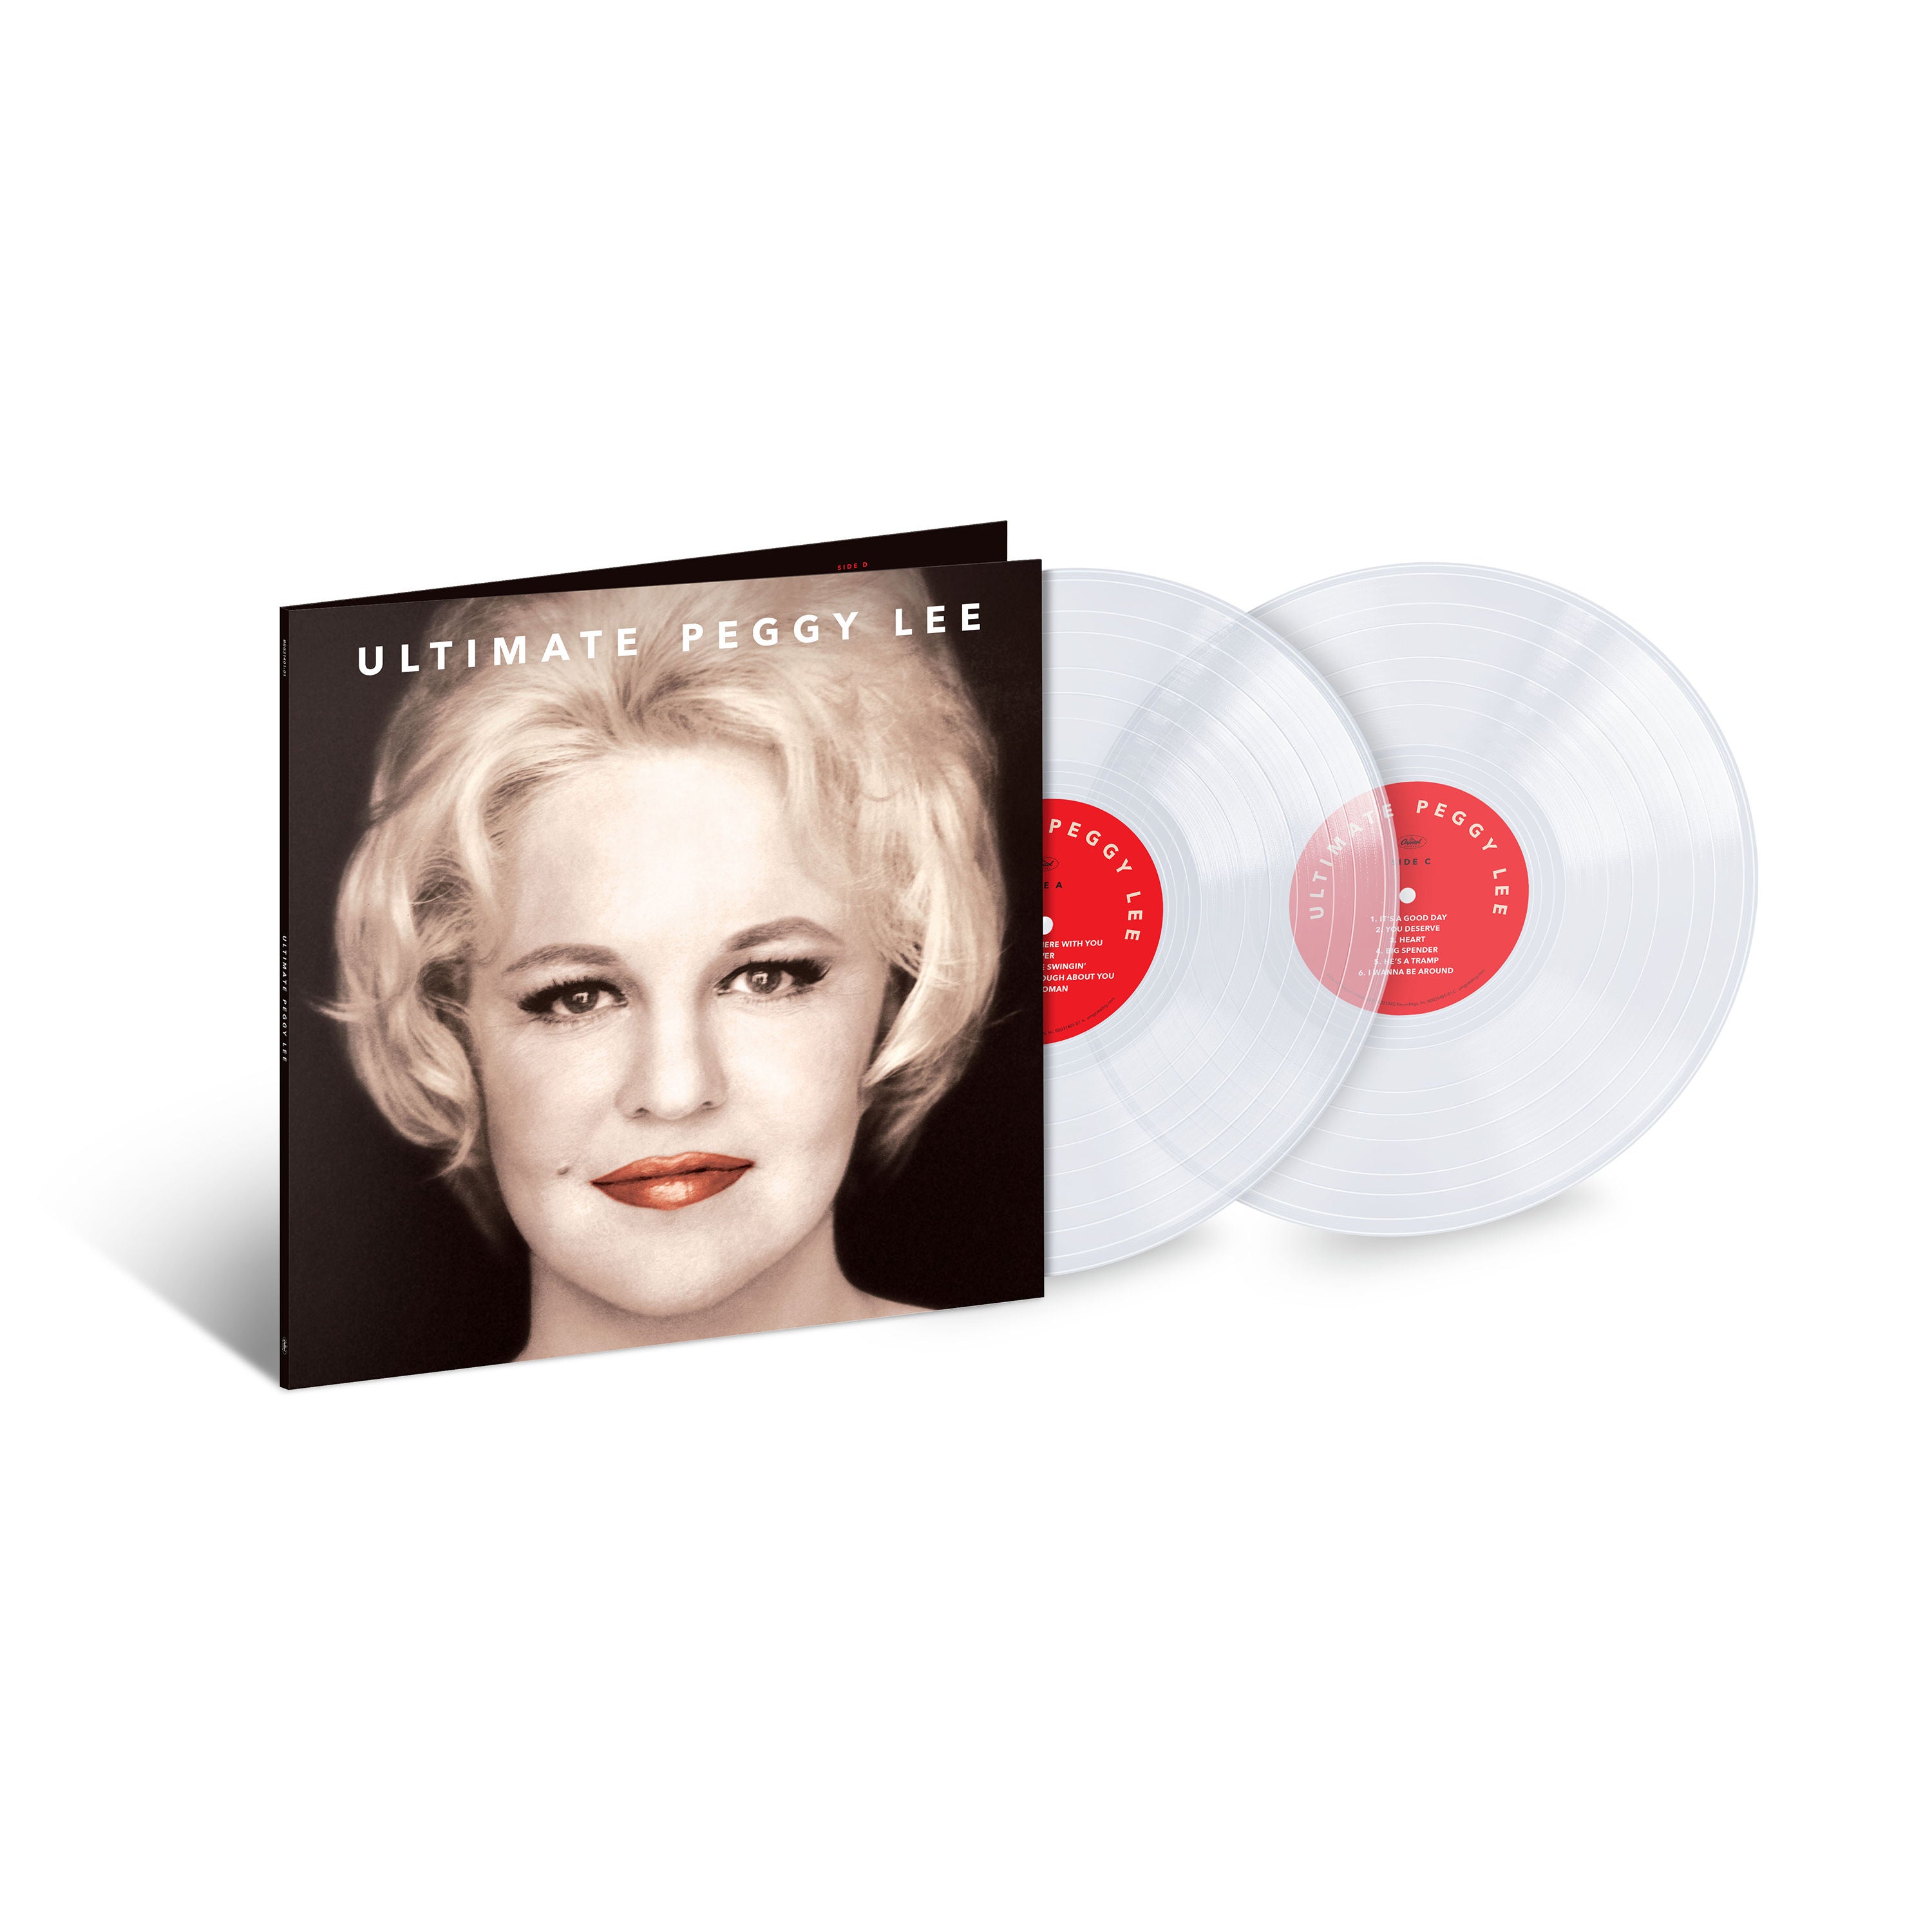 Peggy Lee - Ultimate Peggy Lee: Exclusive Clear Vinyl 2LP